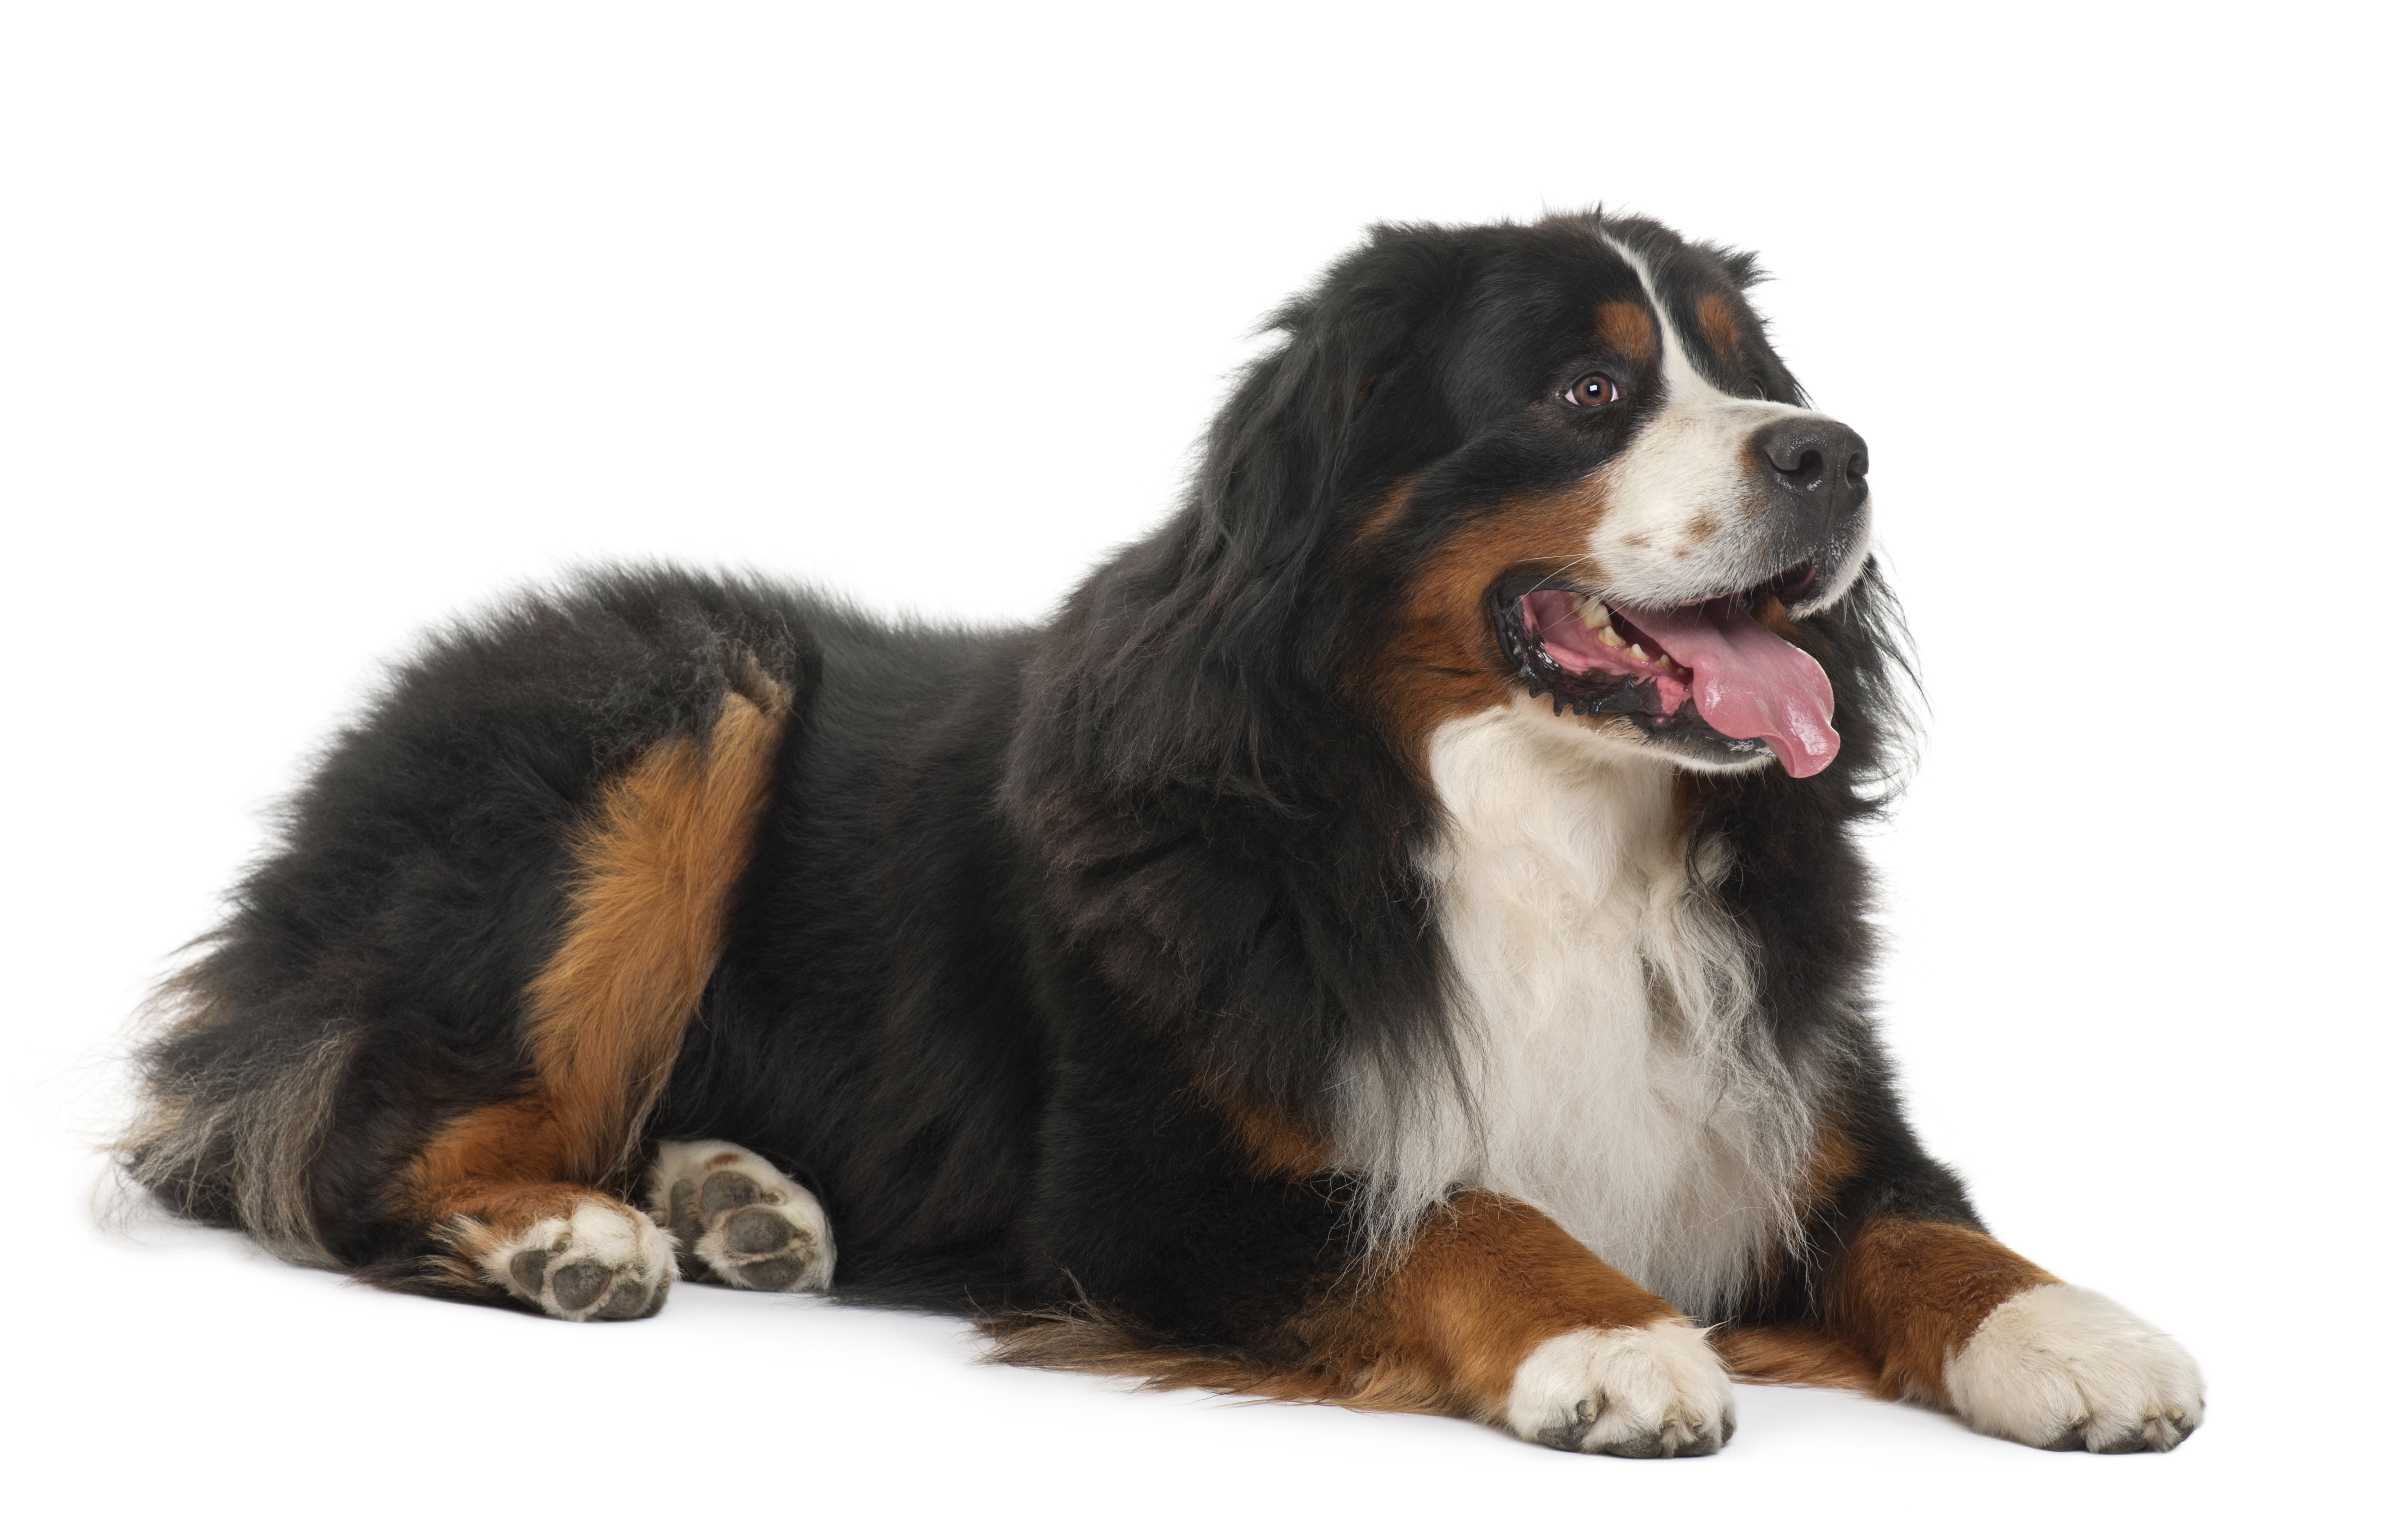 Bernese Mountain Dog, 3 years old, lying in front of white background